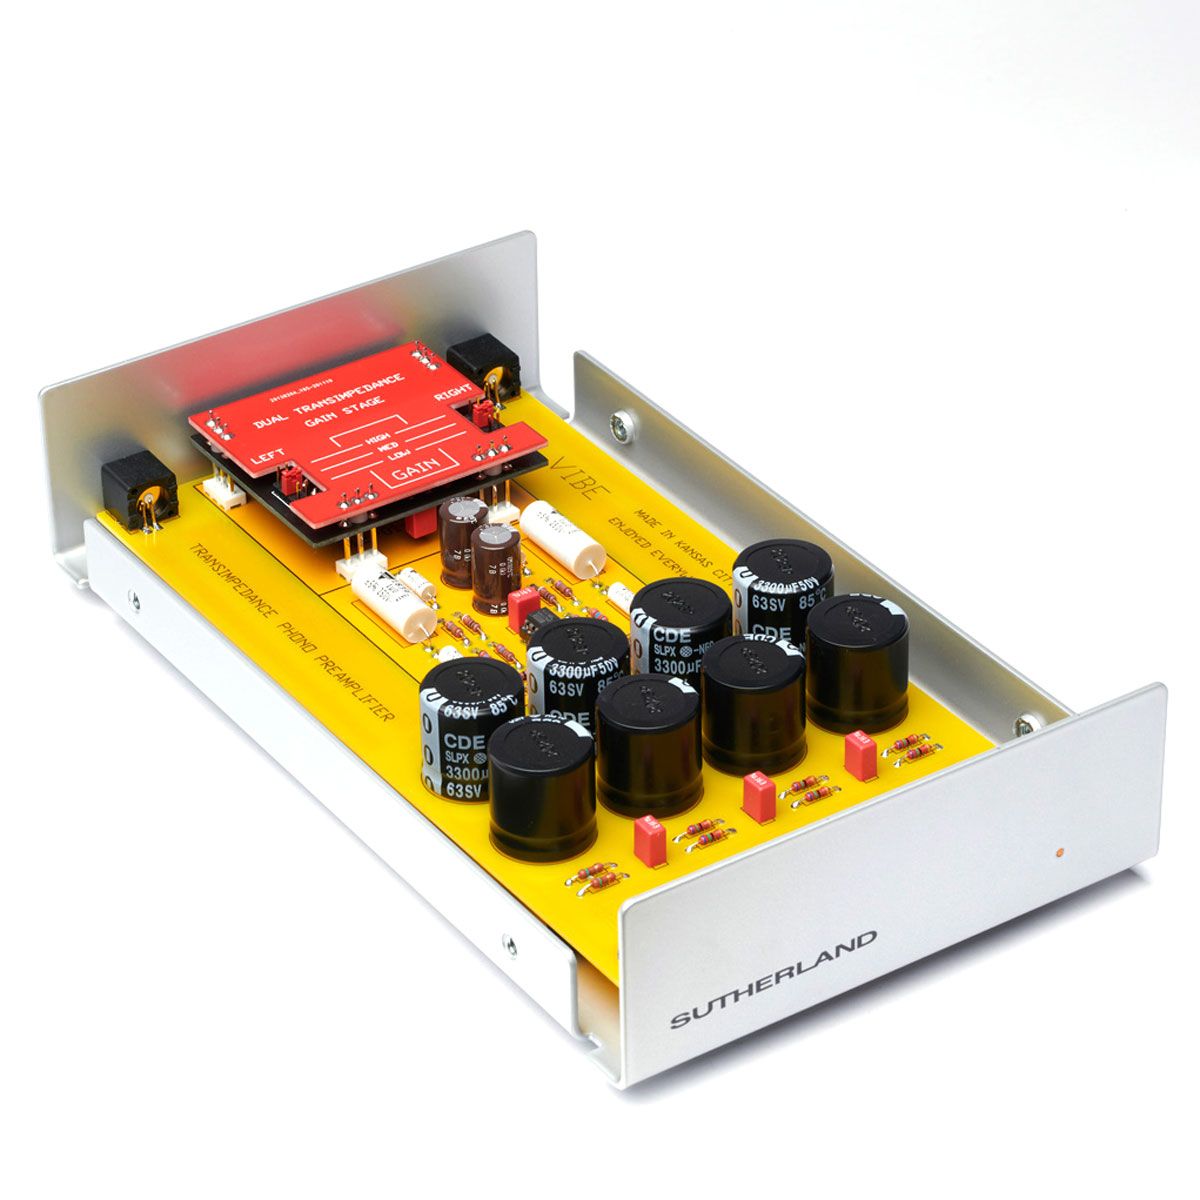 Sutherland TZ Vibe Phono Preamp, top angle view of internal components